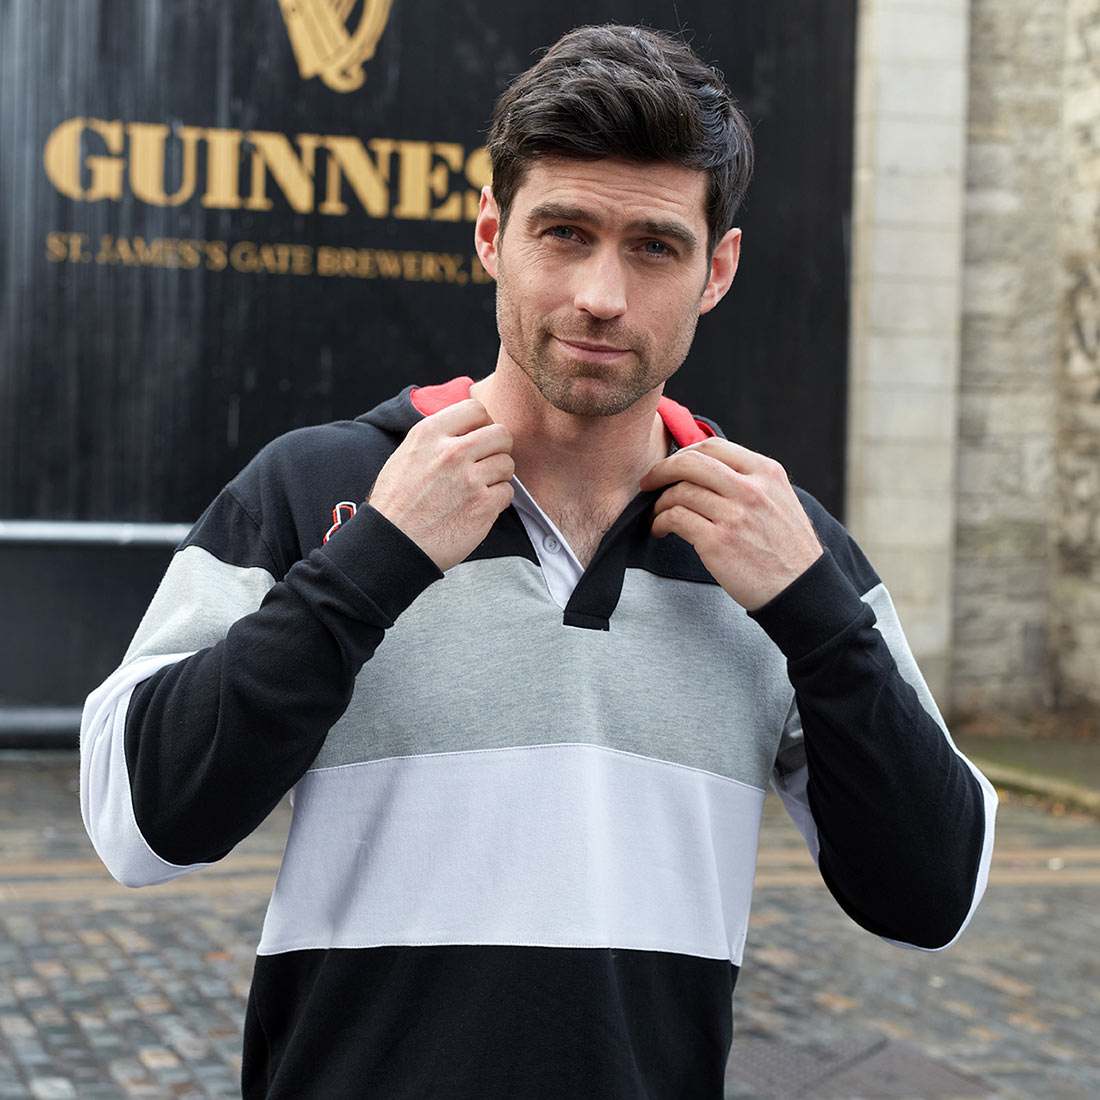 A man sporting a hooded Guinness Black & Red Toucan Hooded Rugby jersey strikes a pose in front of a Guinness sign.